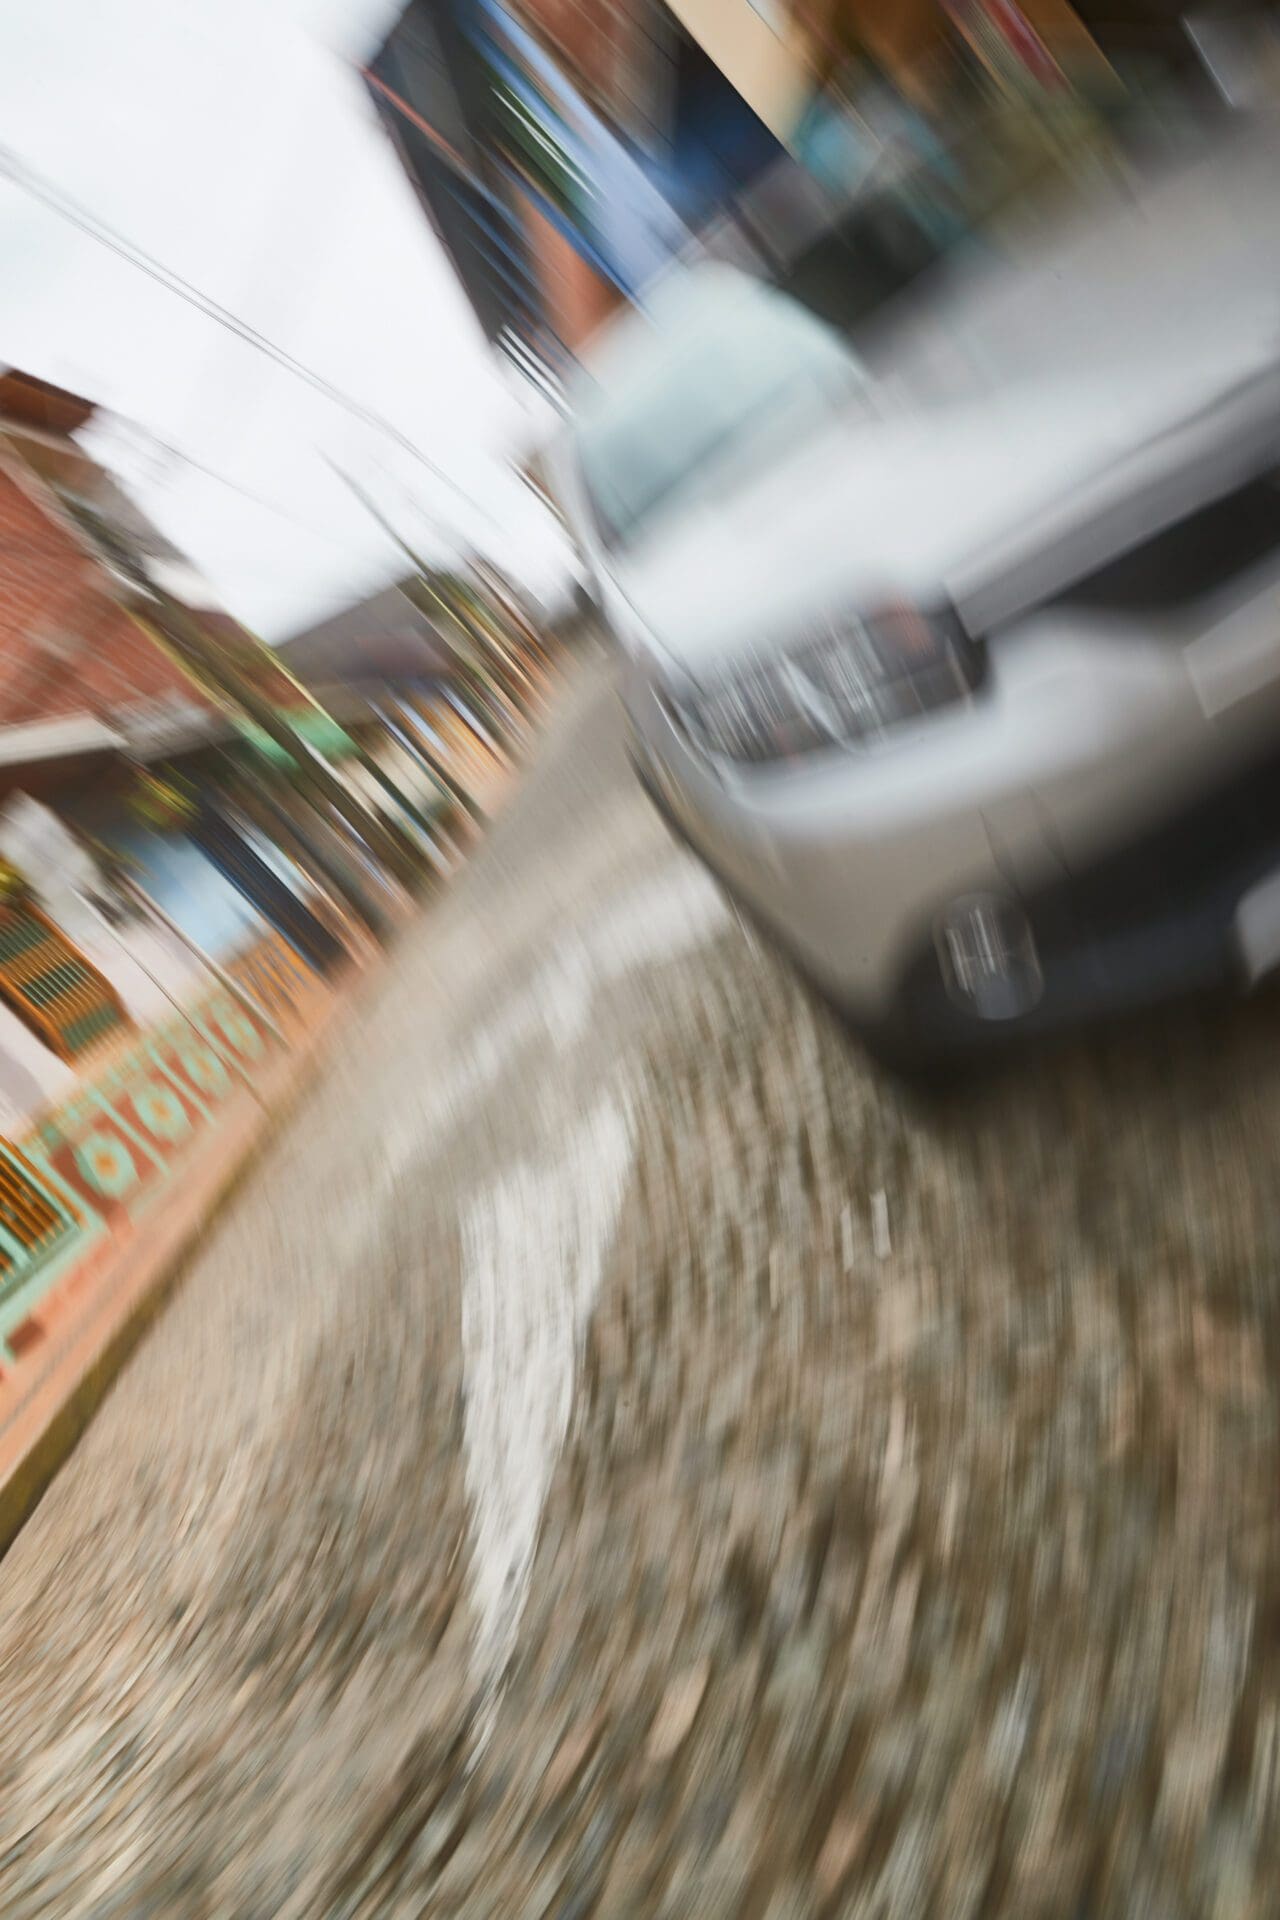 A blurry image of a car driving down a street.